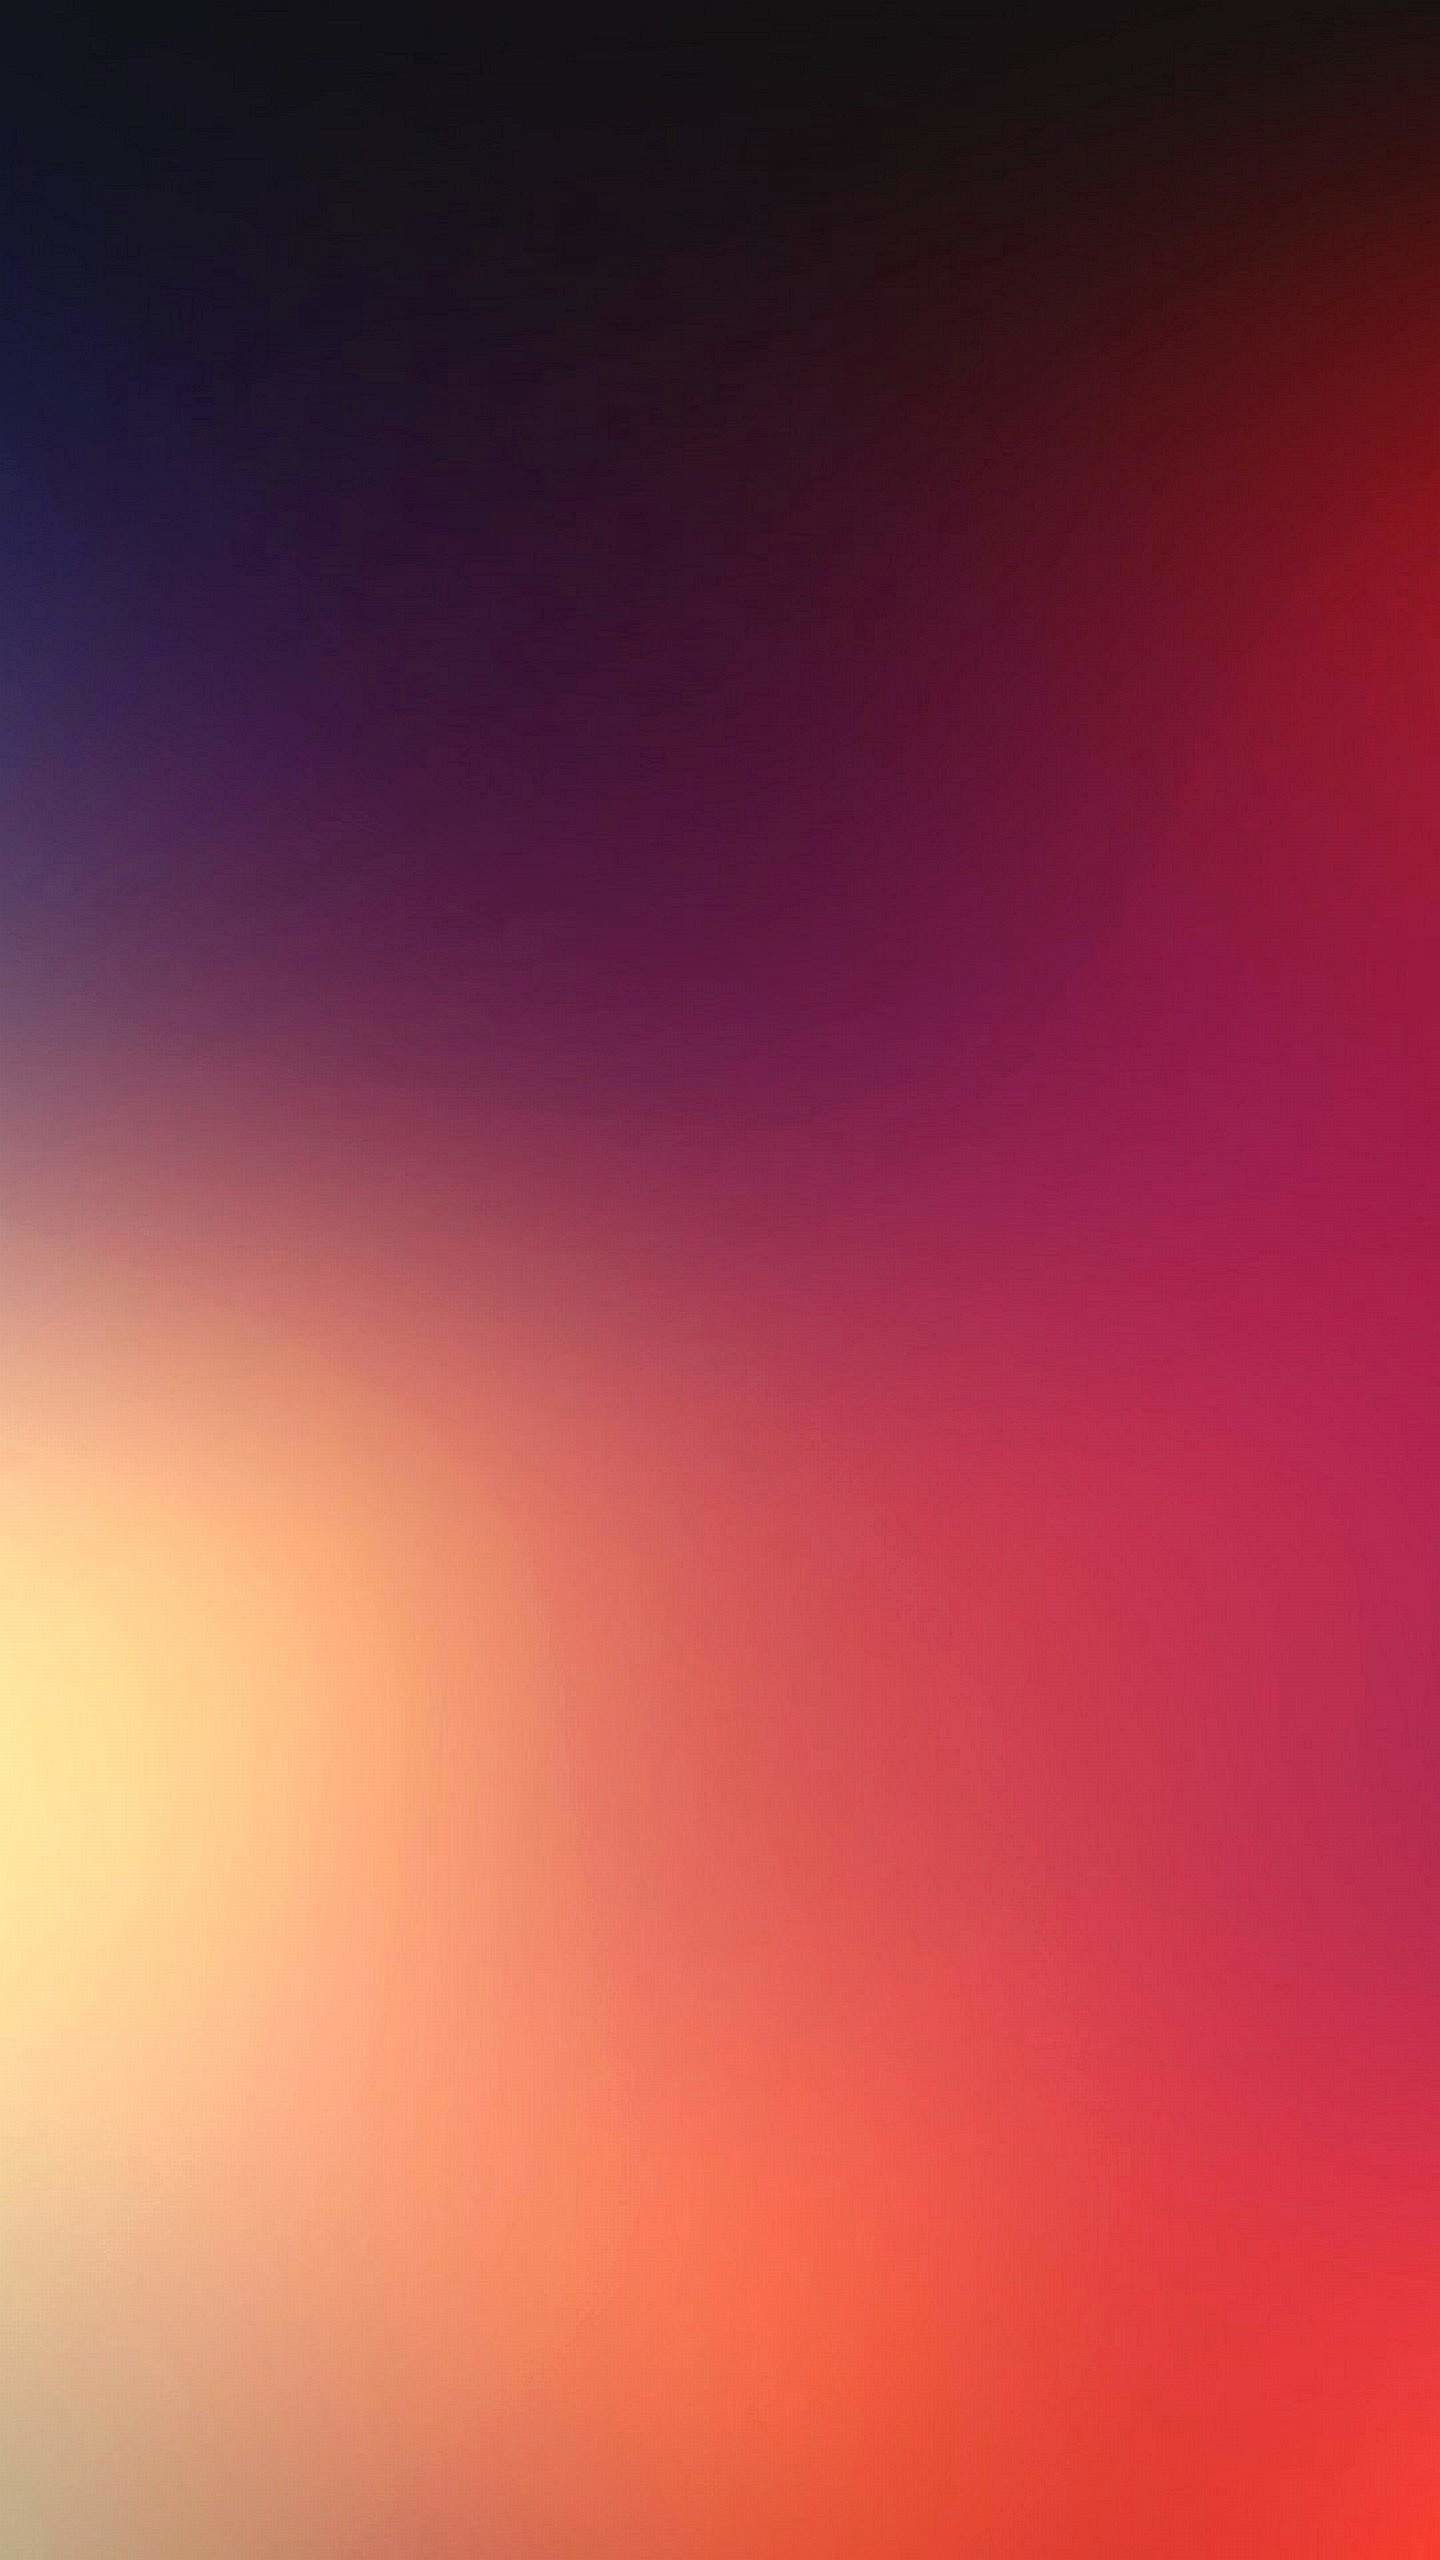 1440x2560 20 colorful wallpapers for your Quad HD smartphone